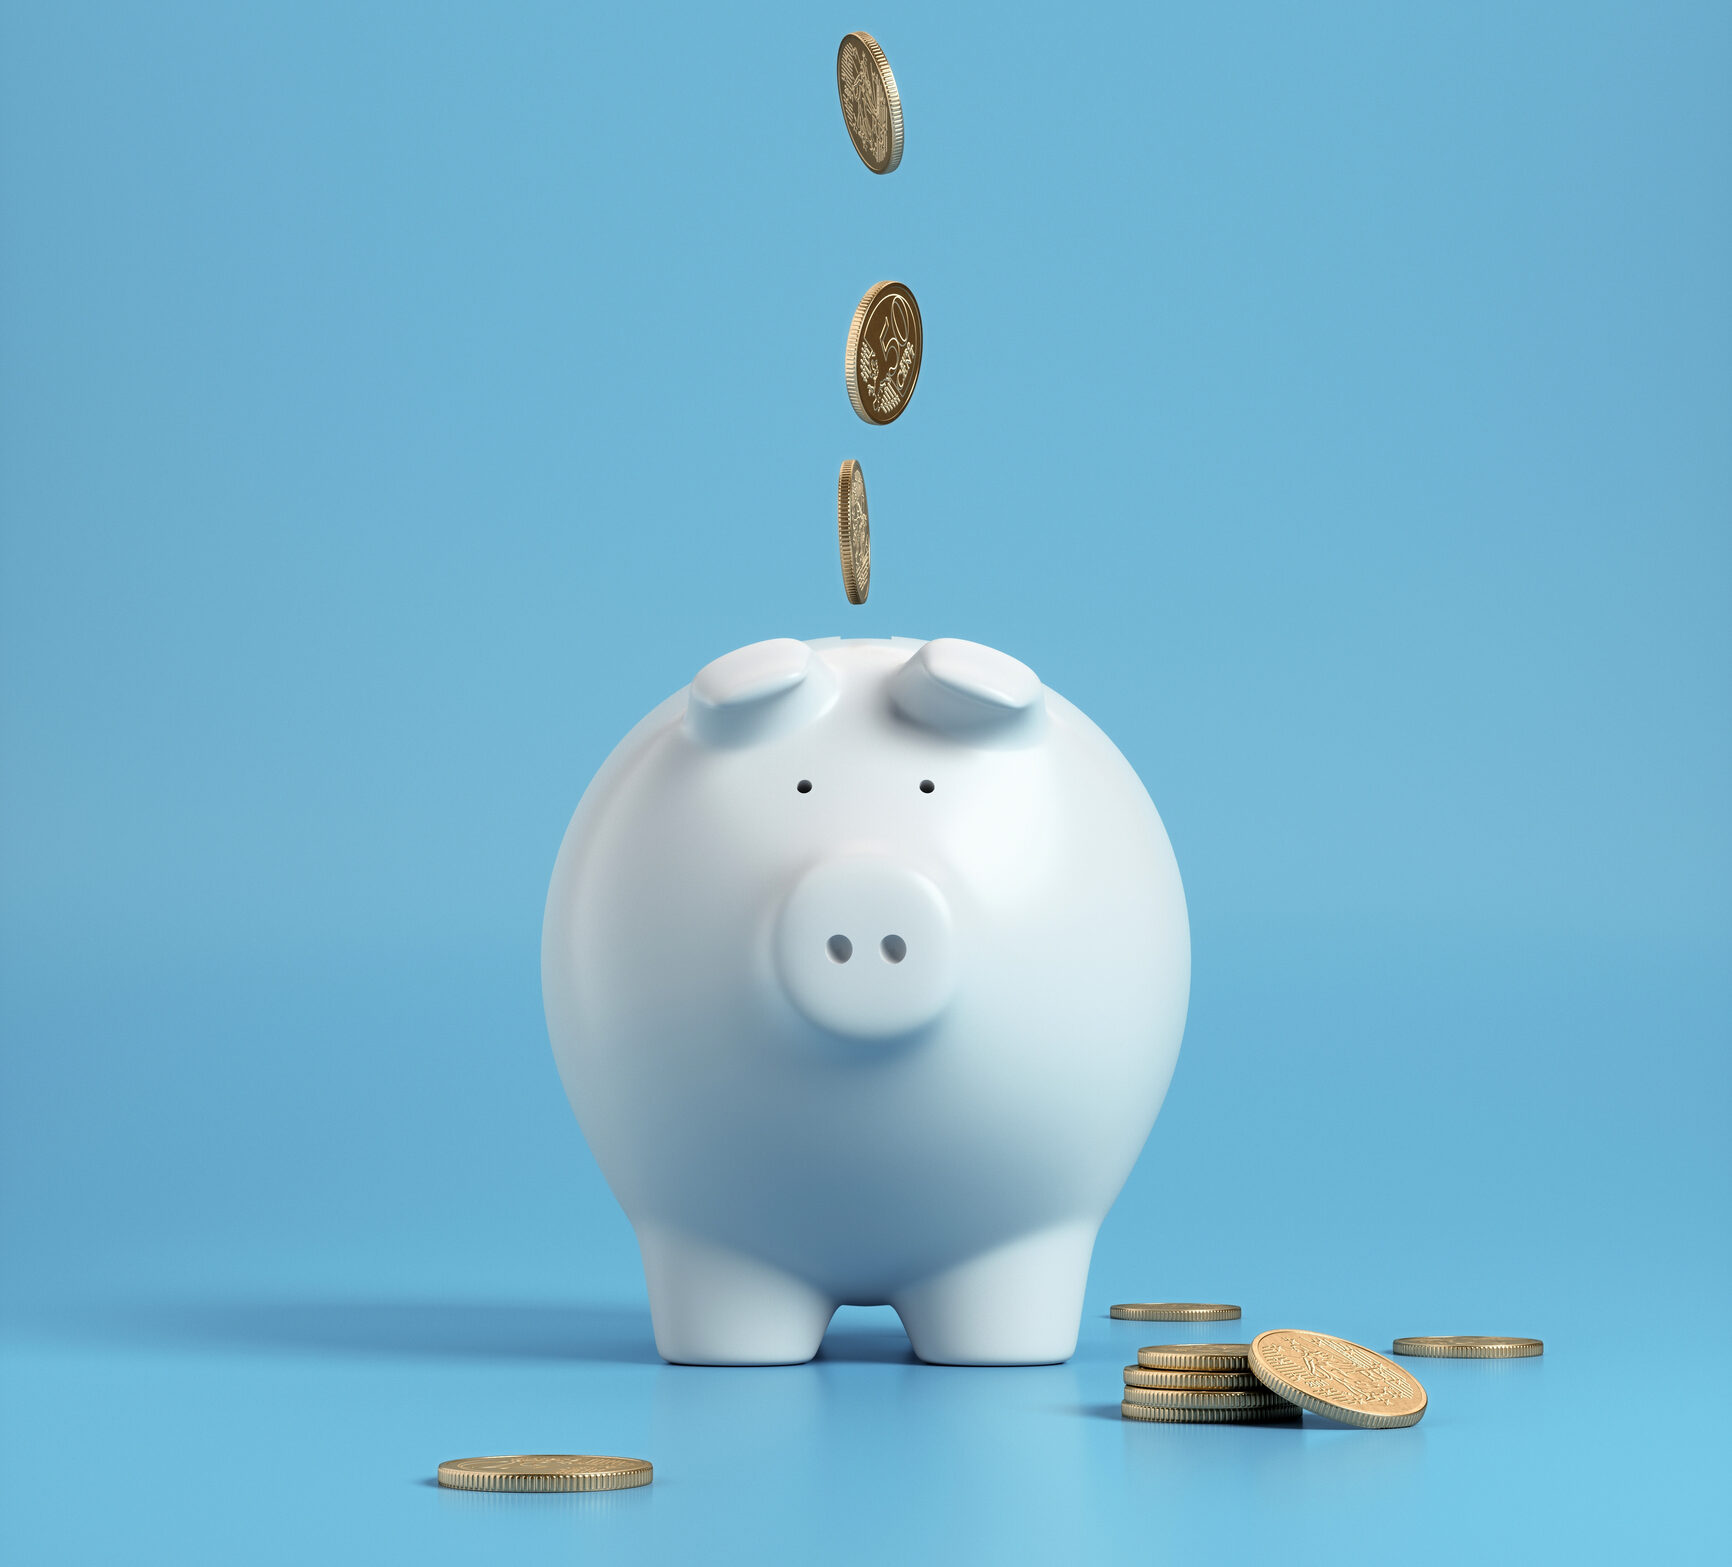 Falling coins in to a white piggy bank with a blue background